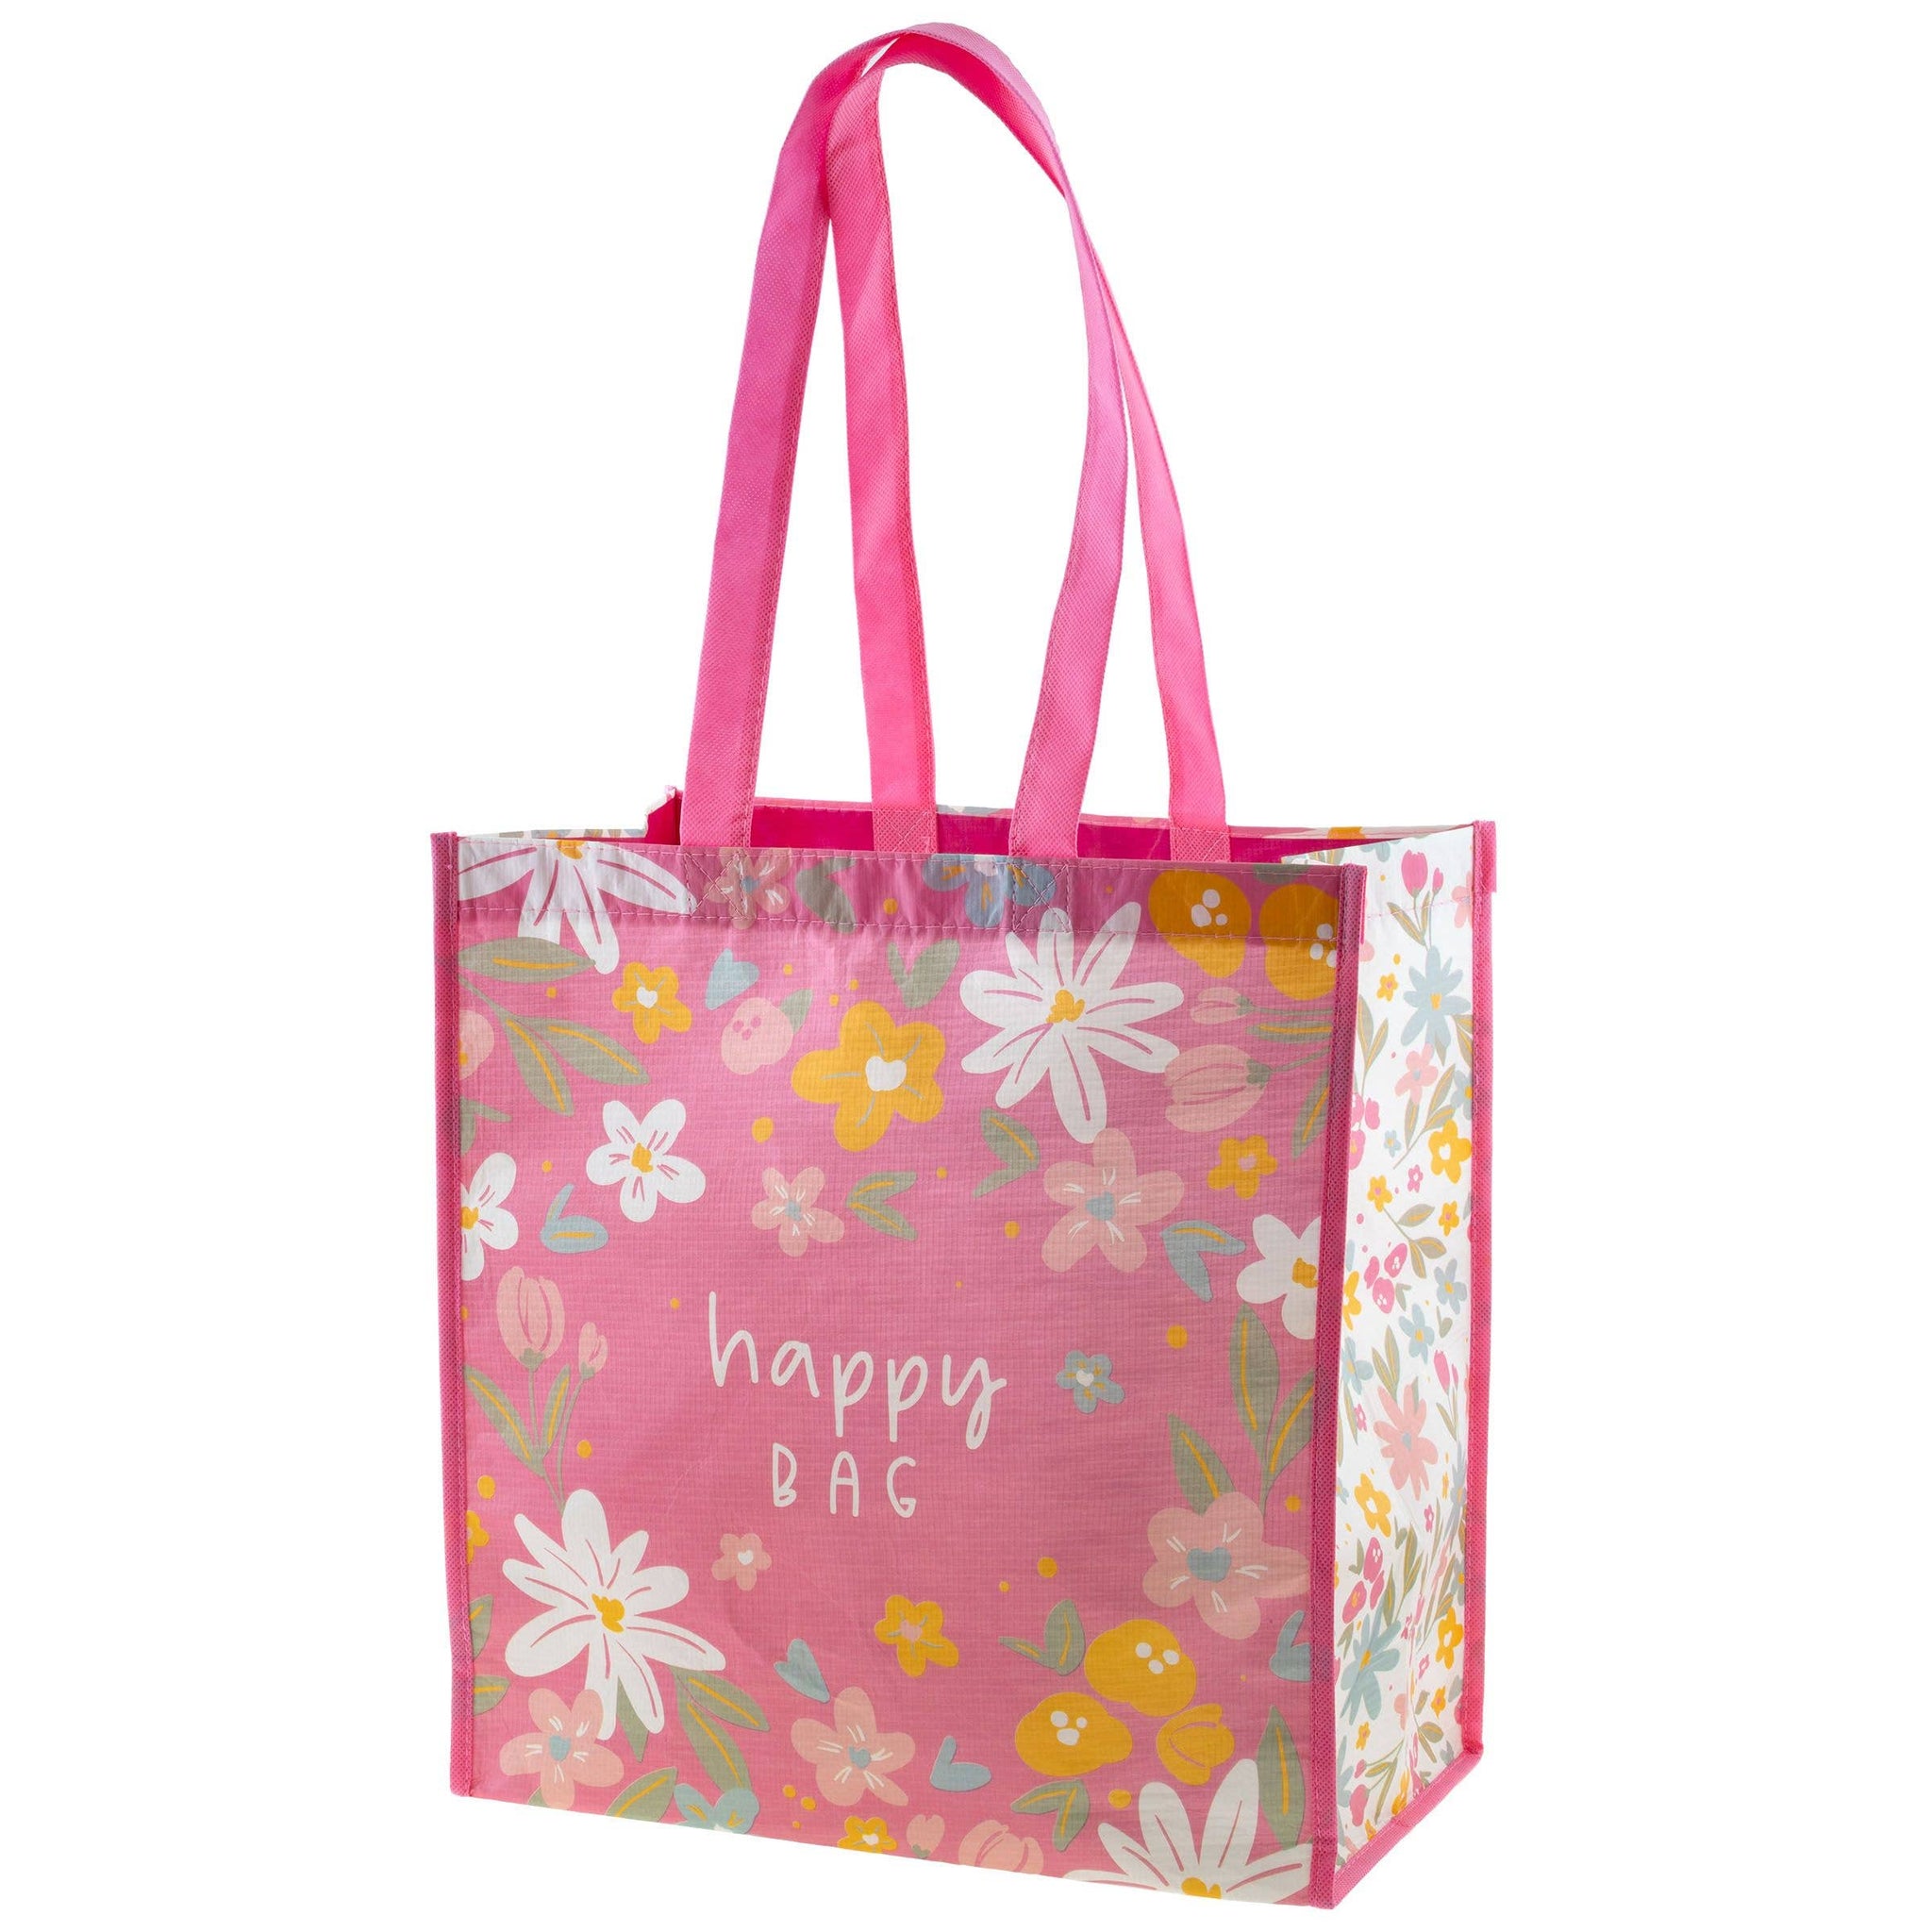 Recycled Large Gift Bag - Happy Bag